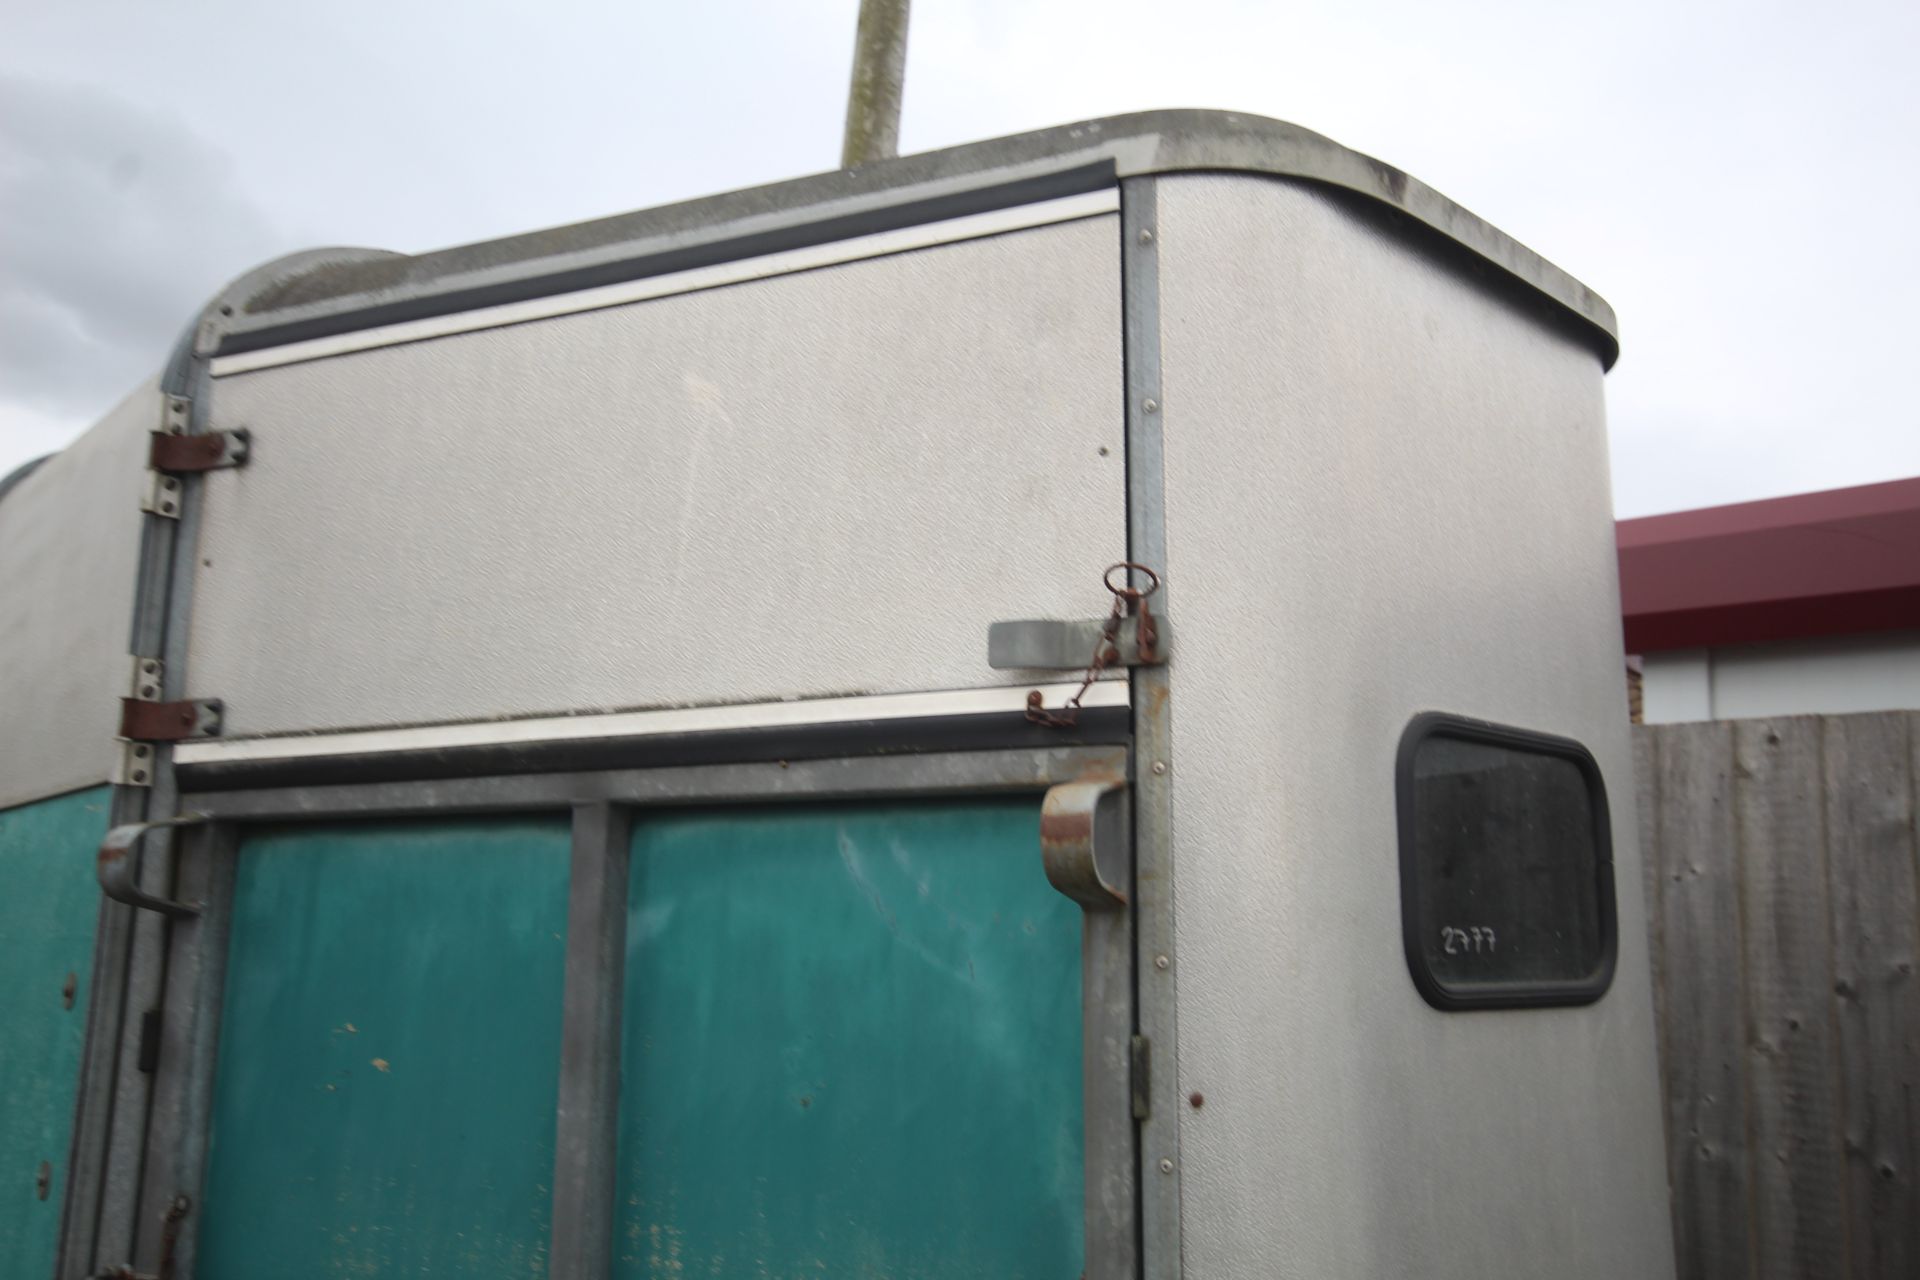 Ifor Williams 505 two horse twin axle horsebox. Recent new floor fitted by main dealer. - Bild 2 aus 44